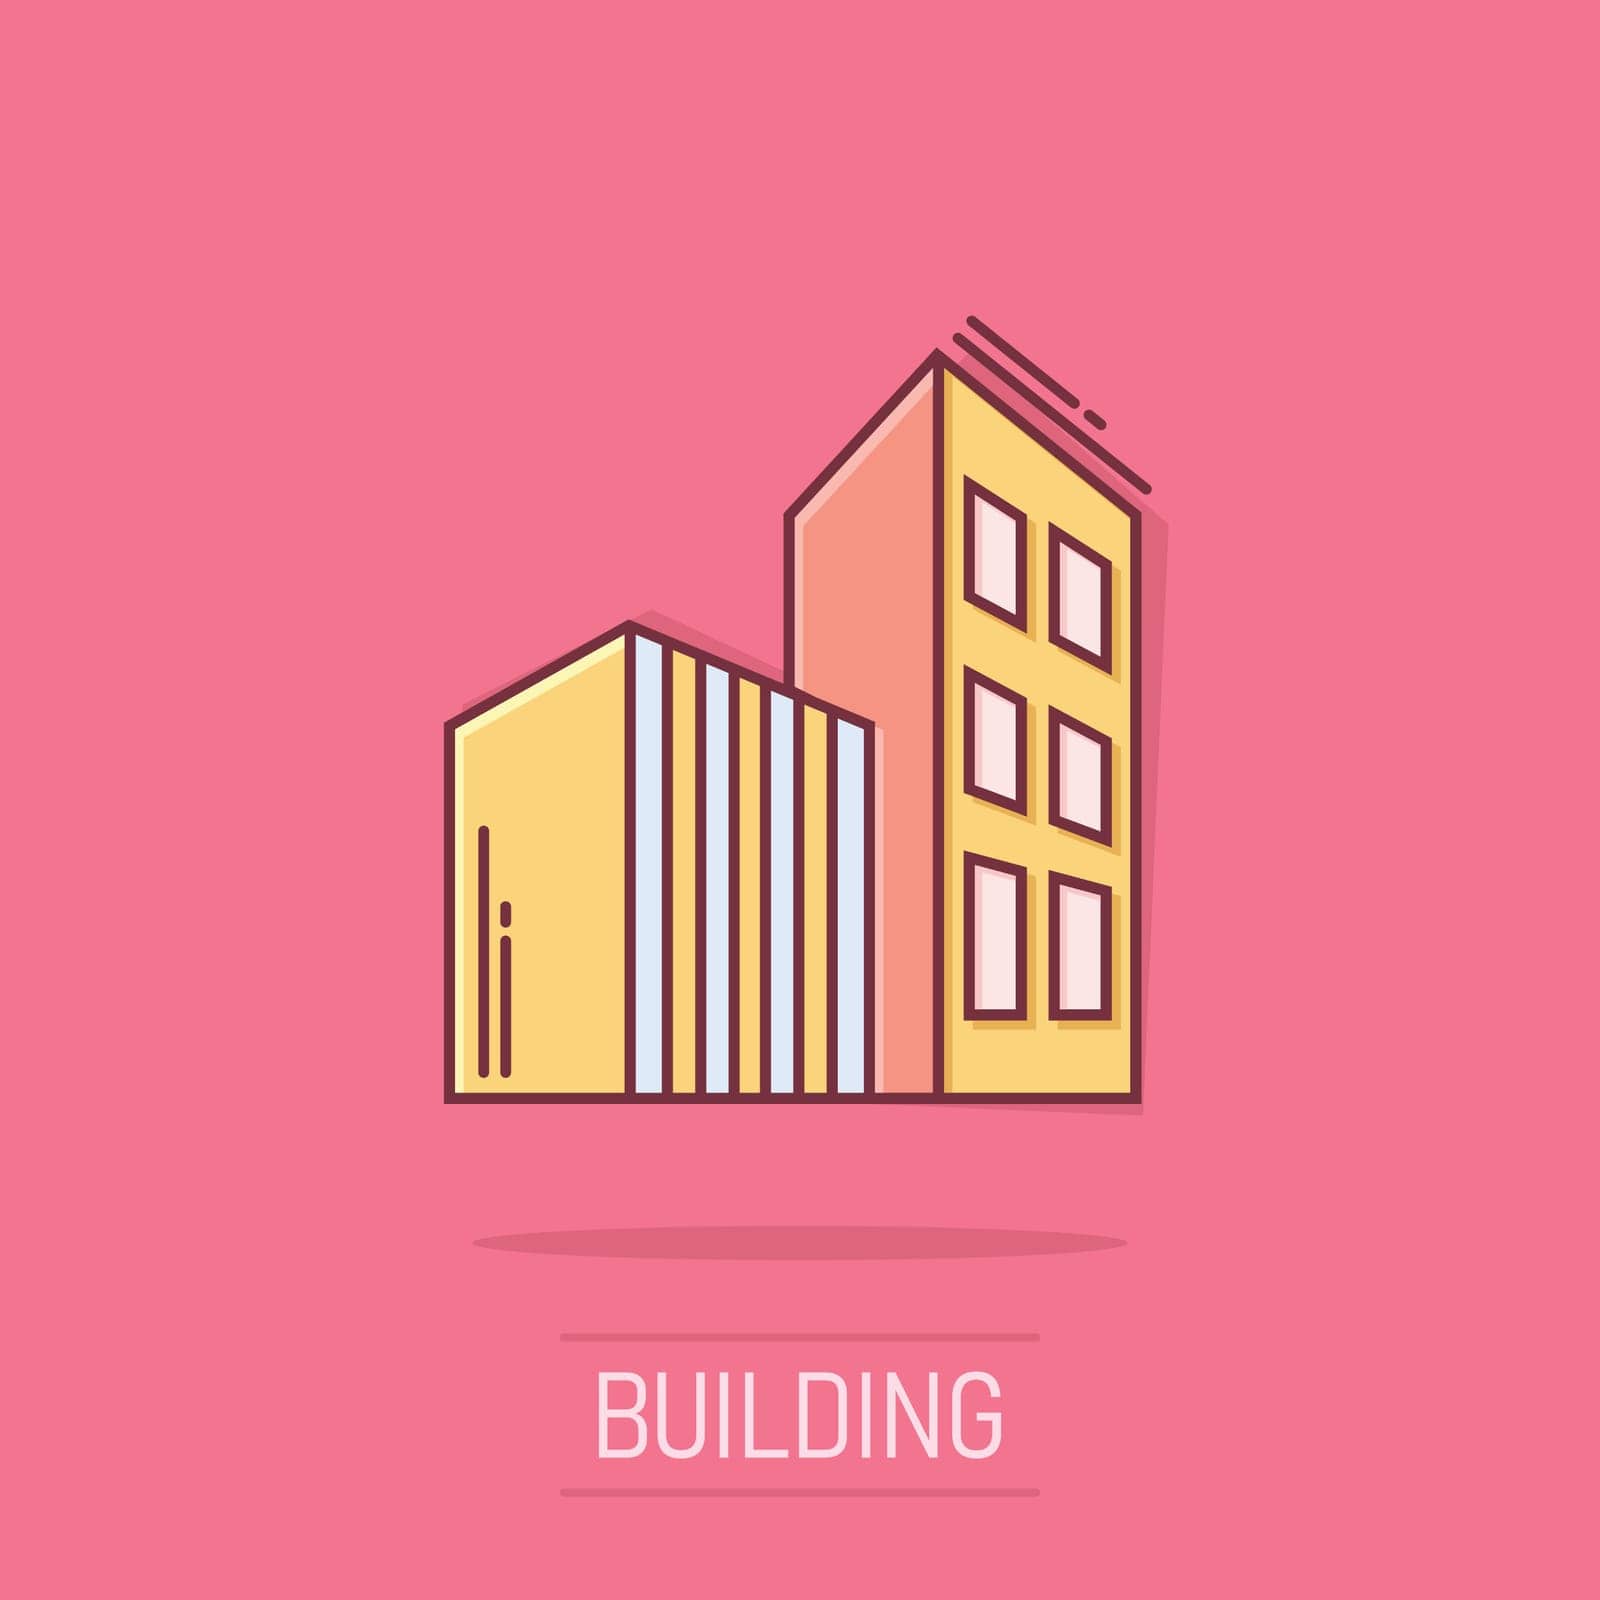 Building icon in comic style. Skyscraper cartoon vector illustration on white isolated background. Architecture splash effect business concept.